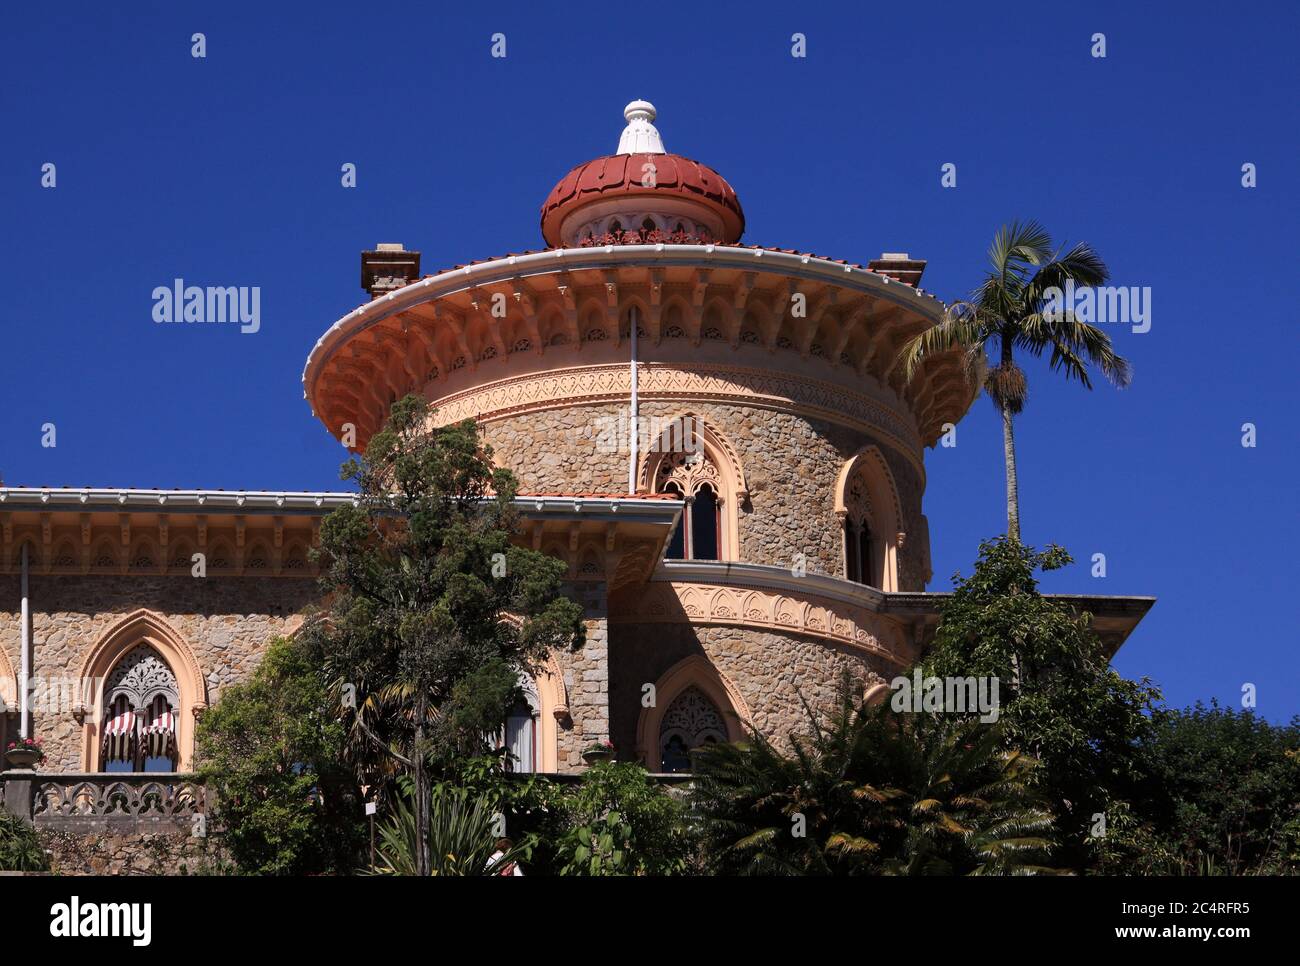 Sintra, Lisbon, Portugal - Detail of Monserrate Palace. Built in Manueline and Neo-Gothic or Portuguese Romantic style. UNESCO World Heritage site. Stock Photo